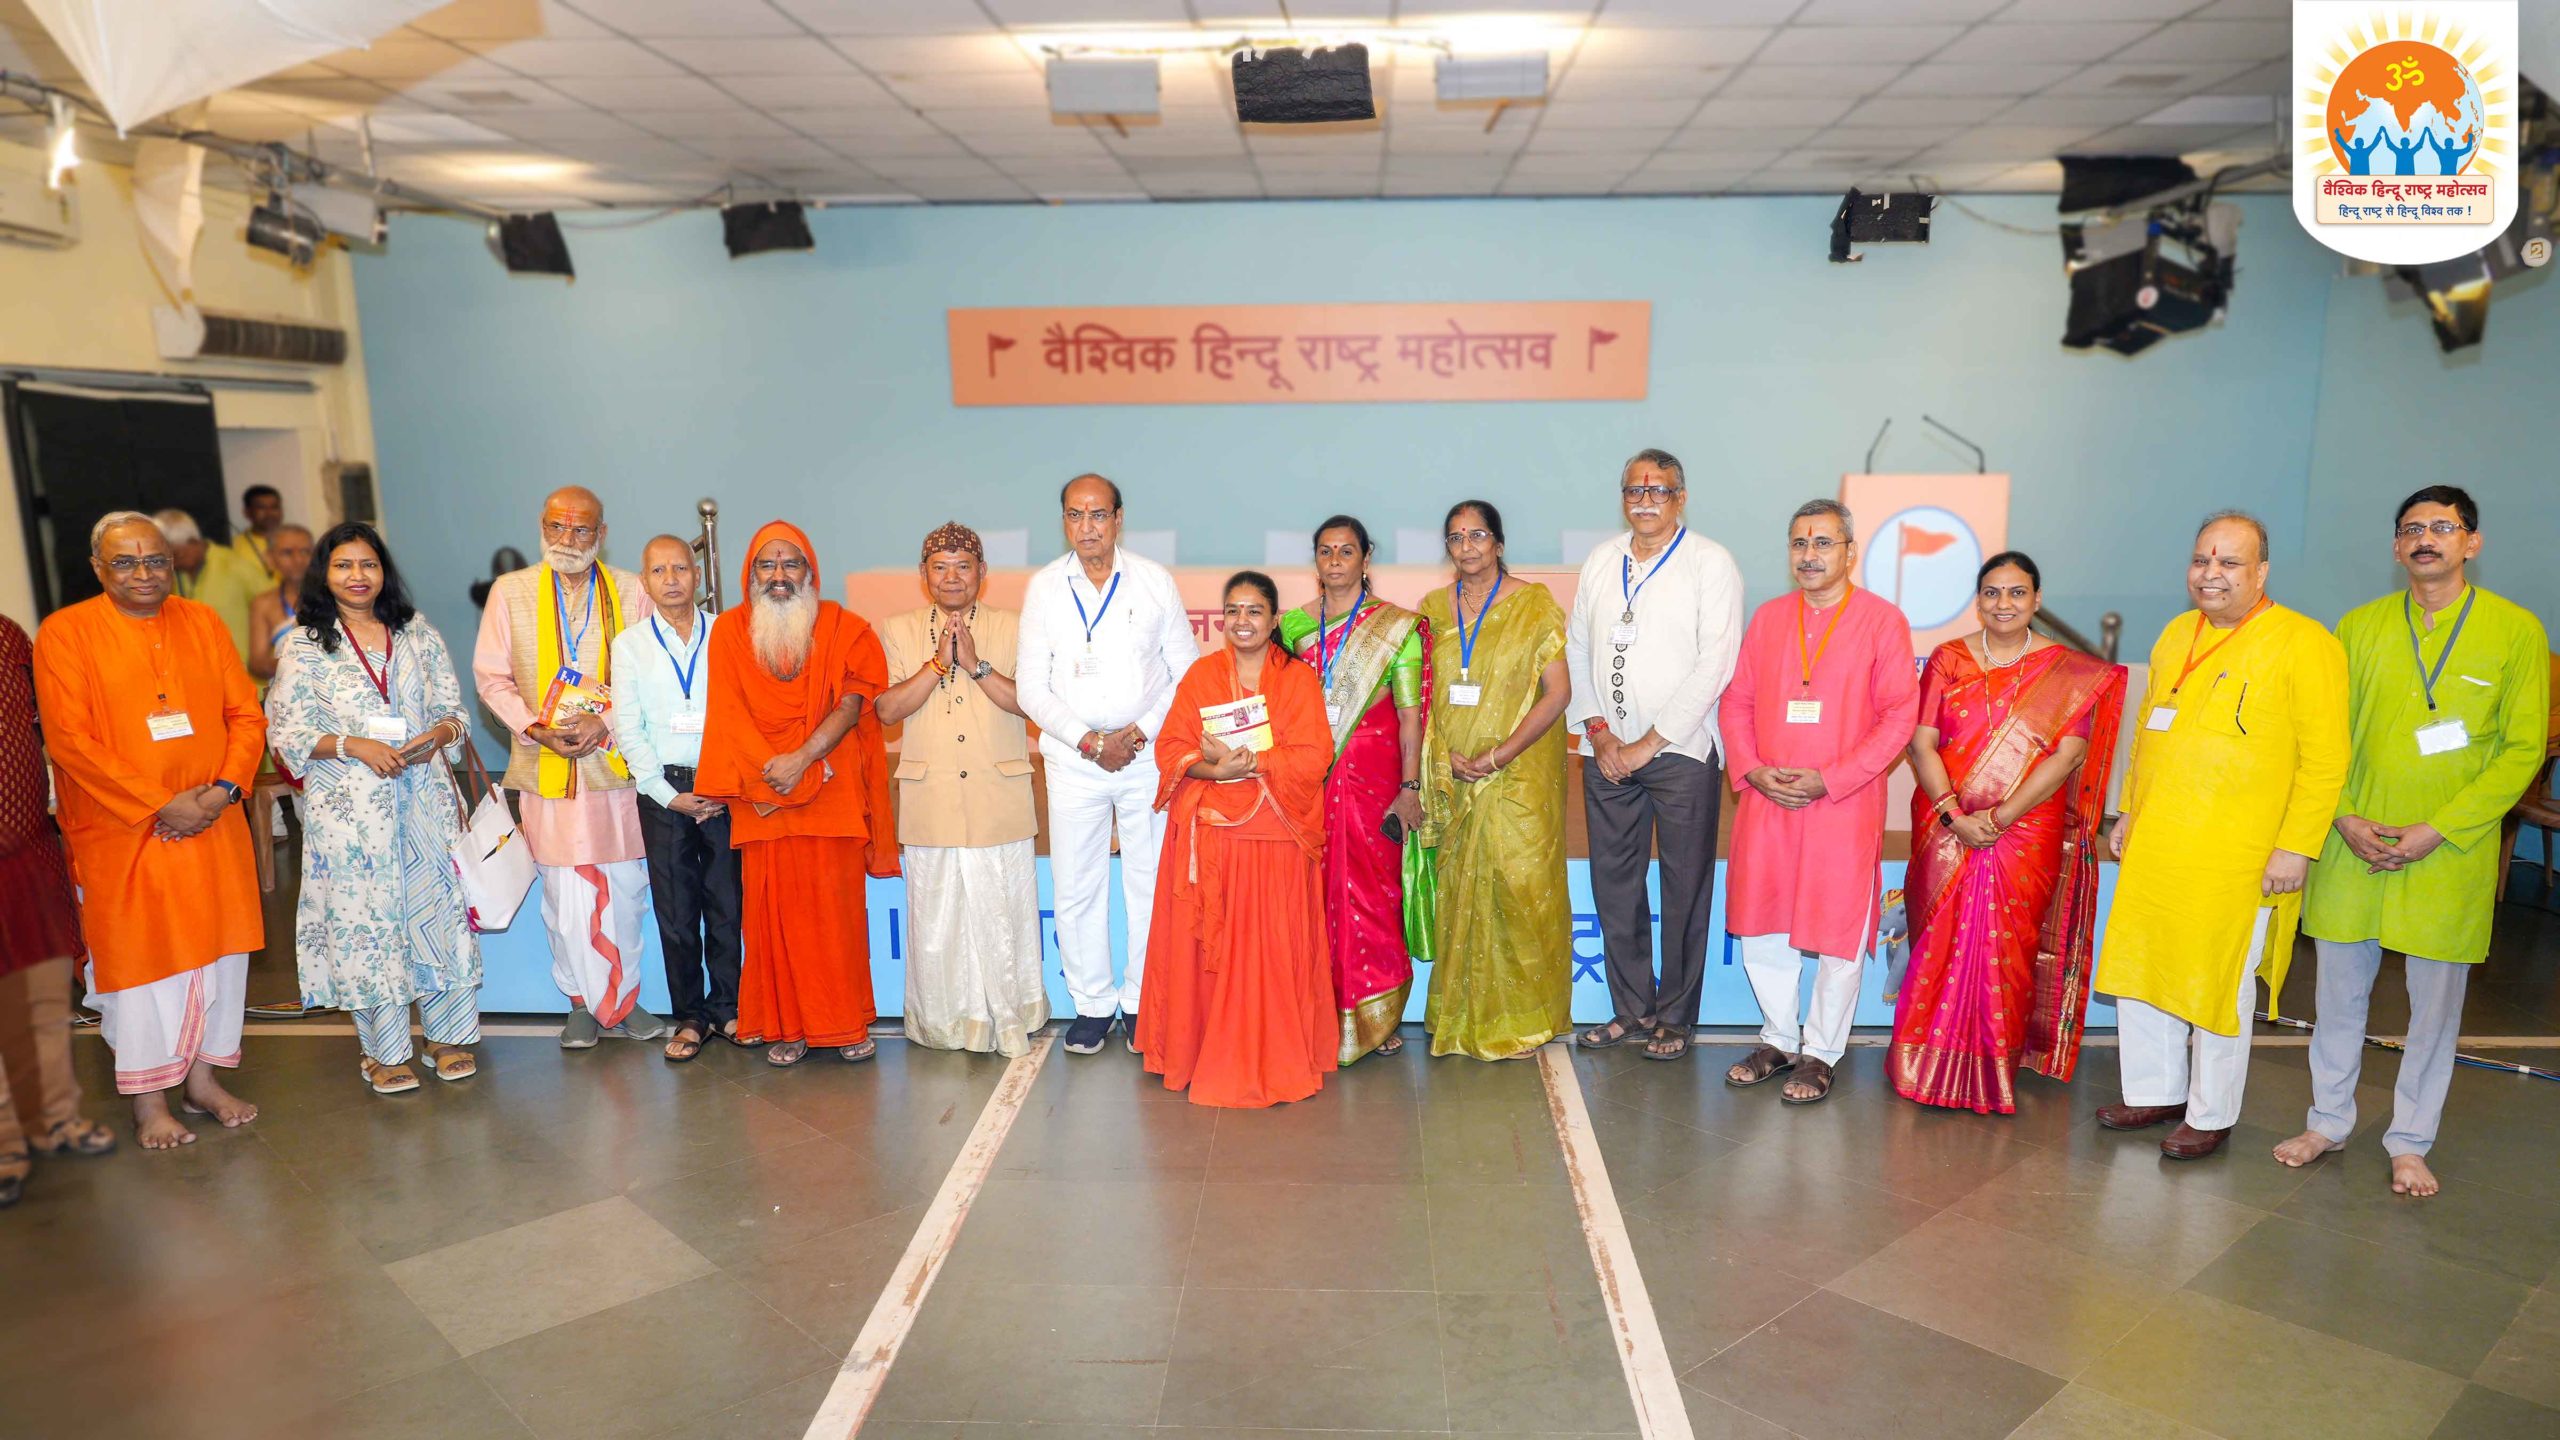 Devout Hindus from across the globe, participated in the Vaishvik Hindu Rashtra Mahotsav with a common goal of helping Hindu Dharma regain its past glory